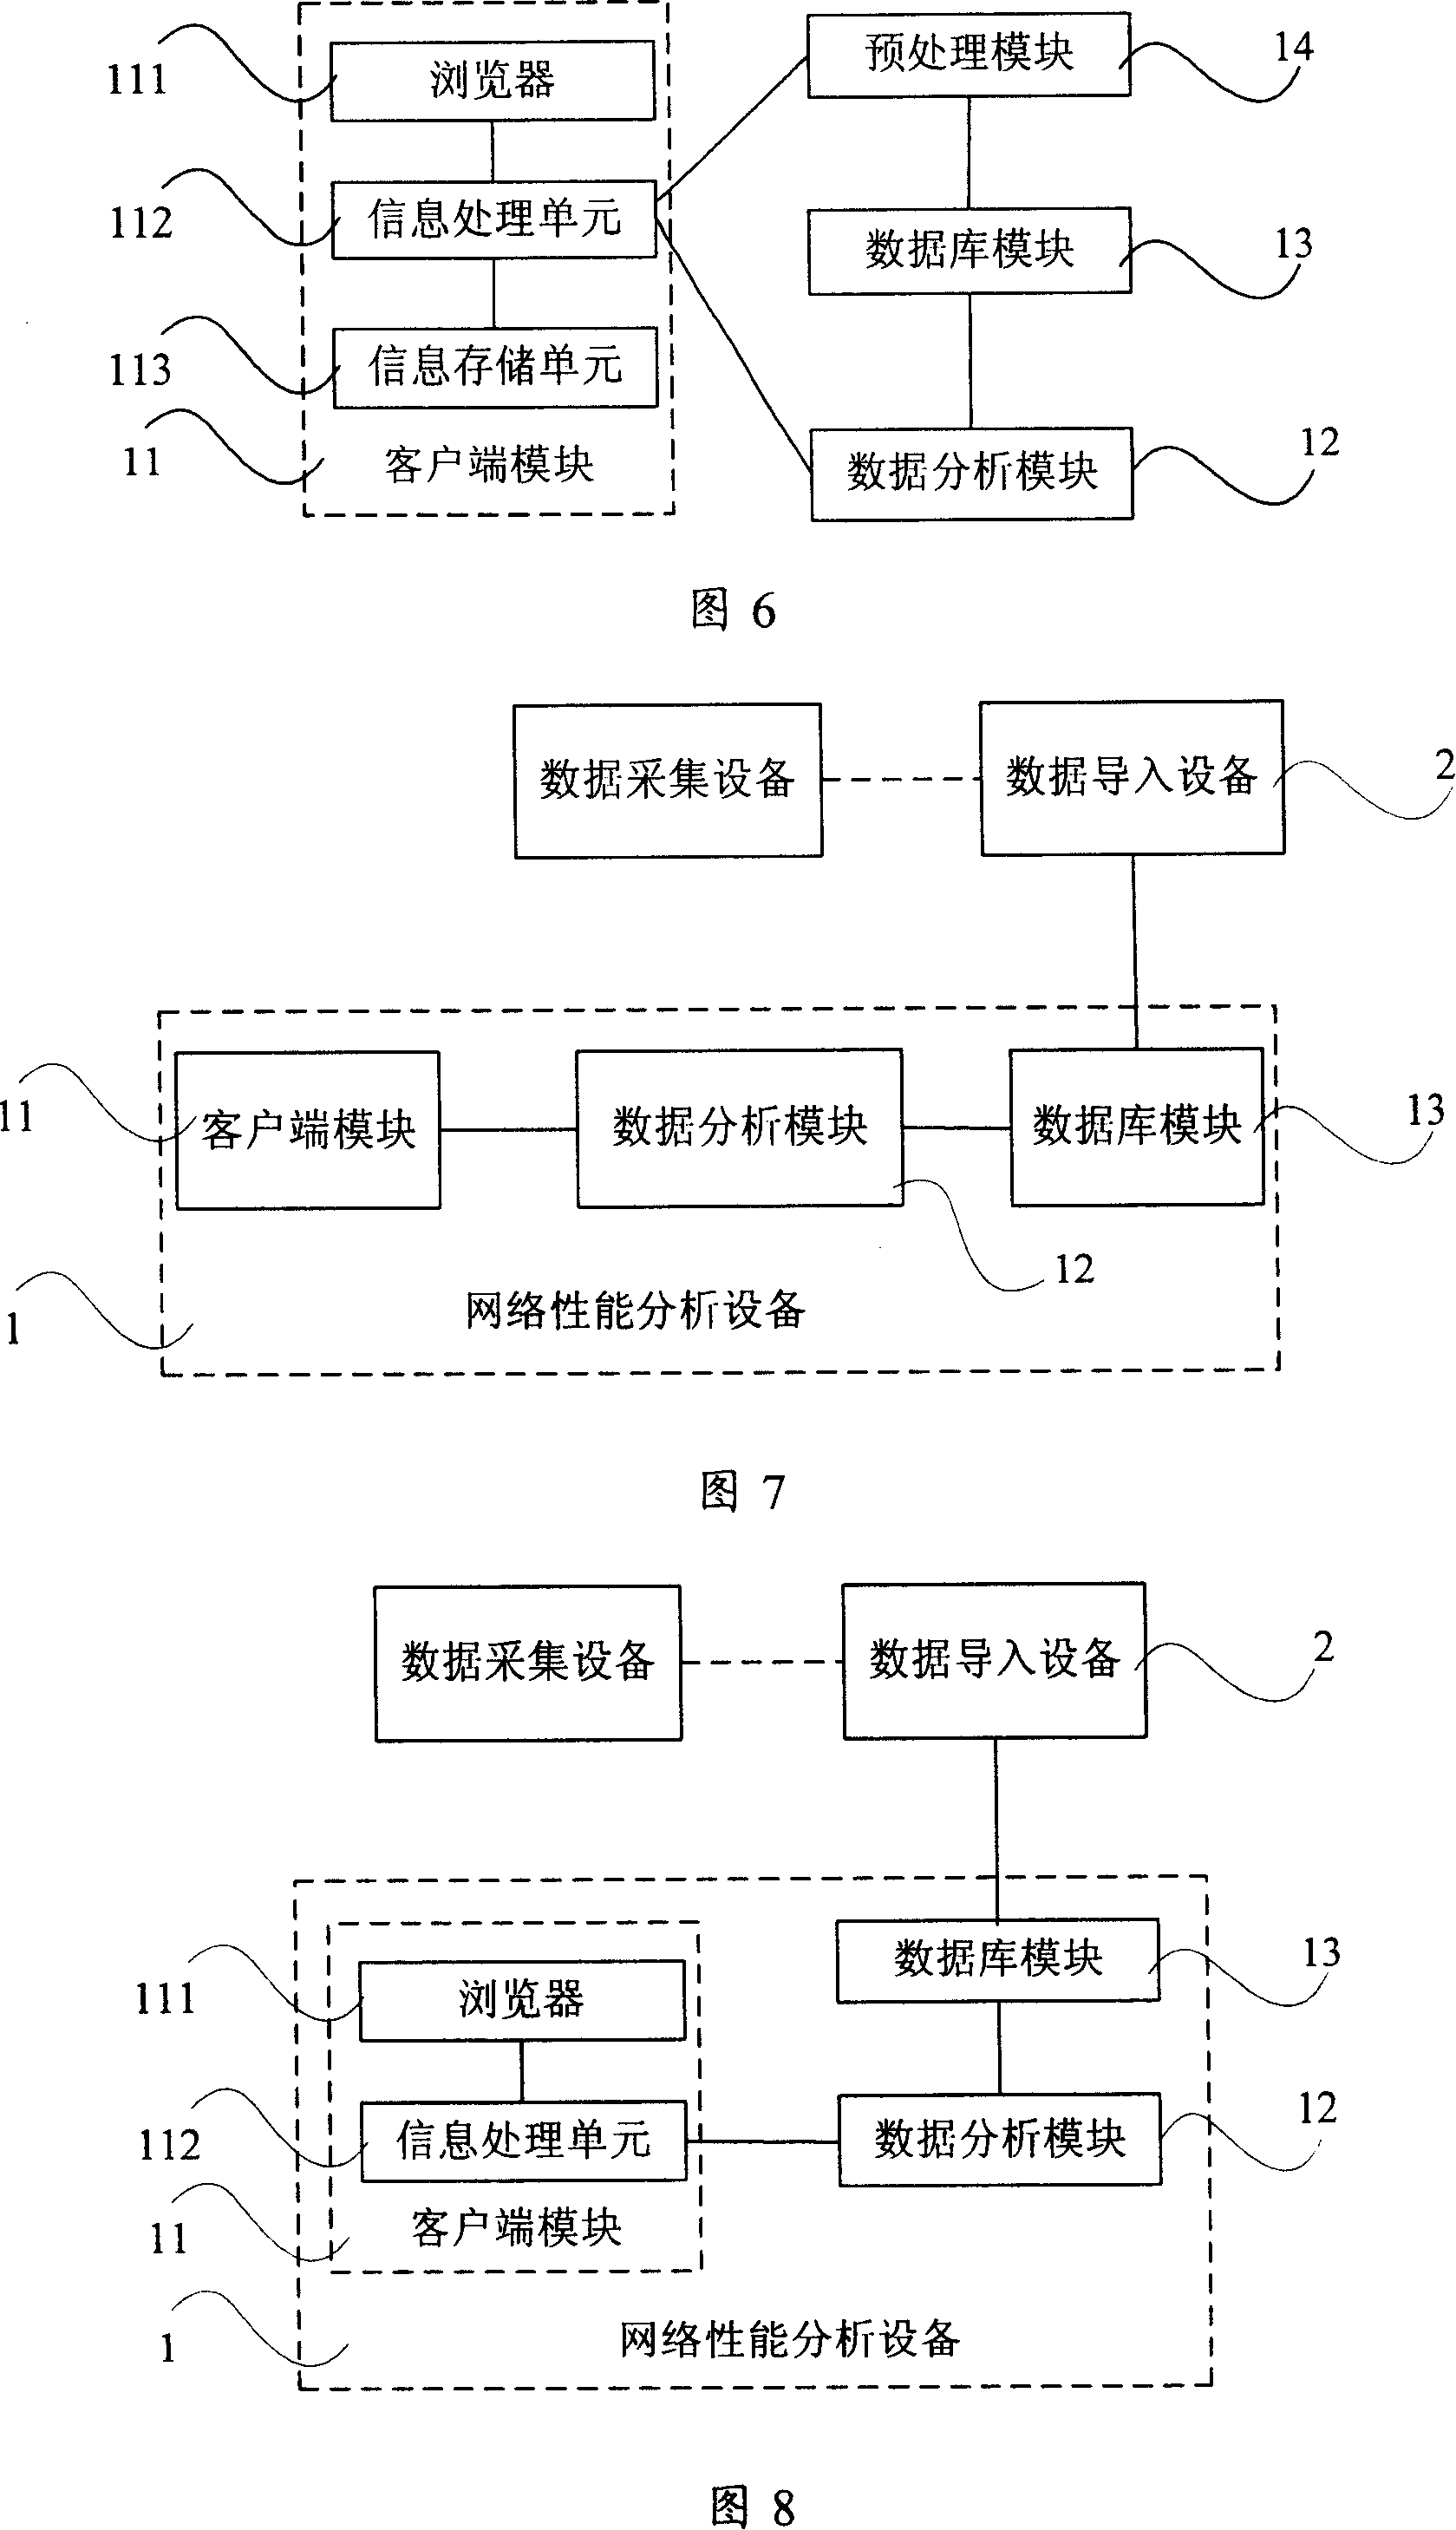 Network performance analysis system and method